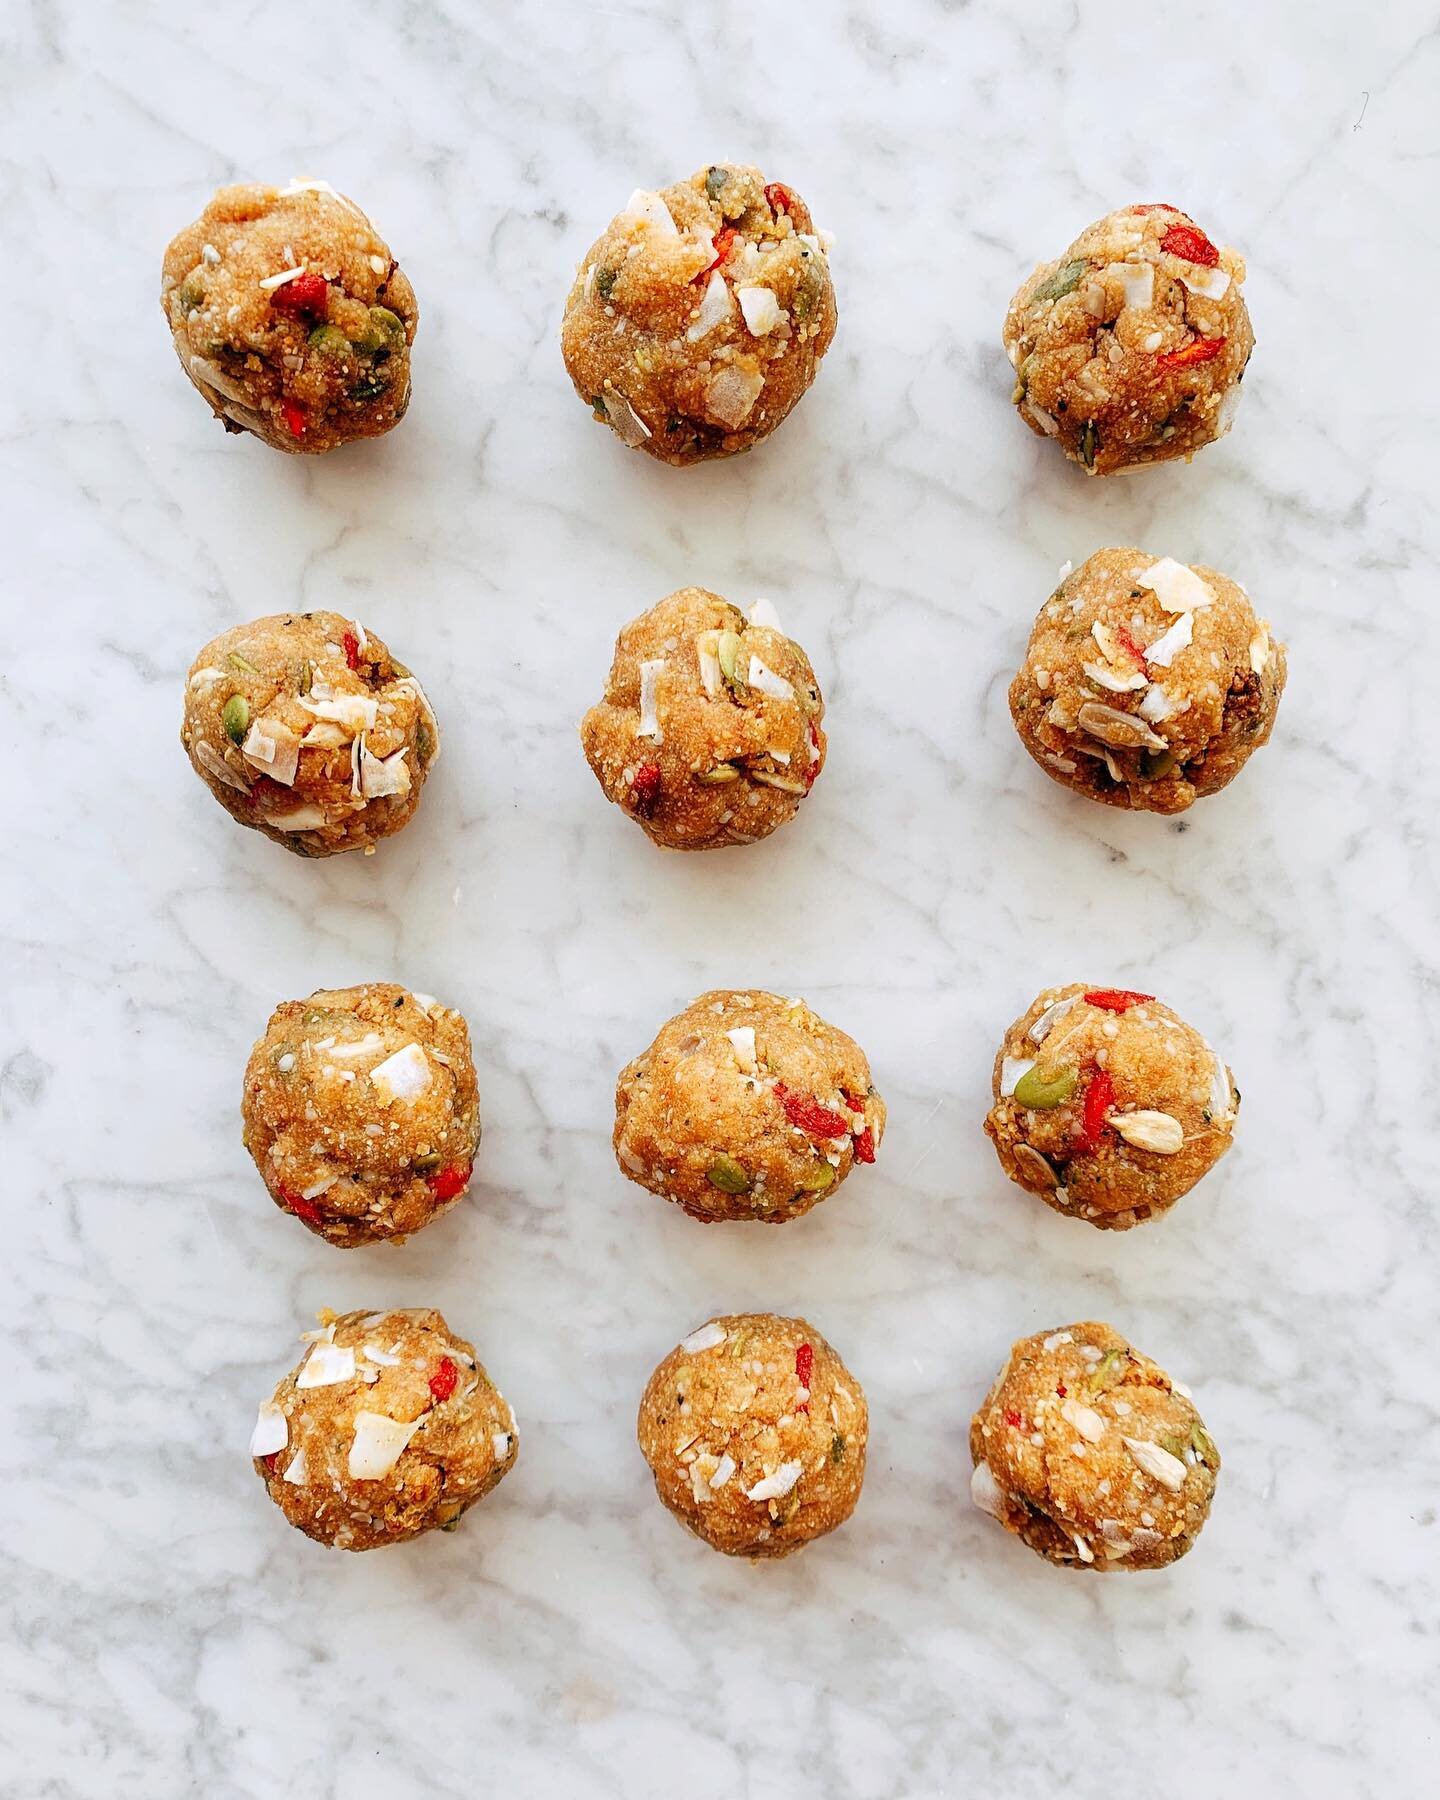 SUPERFOOD MACA BALLS! 💫 Made in partnership with @organictraditions 🌈 Energy balls are a favourite around here, and these seedy little hormone-balancing snacks are loaded with @organictraditions maca powder (with probiotics!) for women and nutritiv